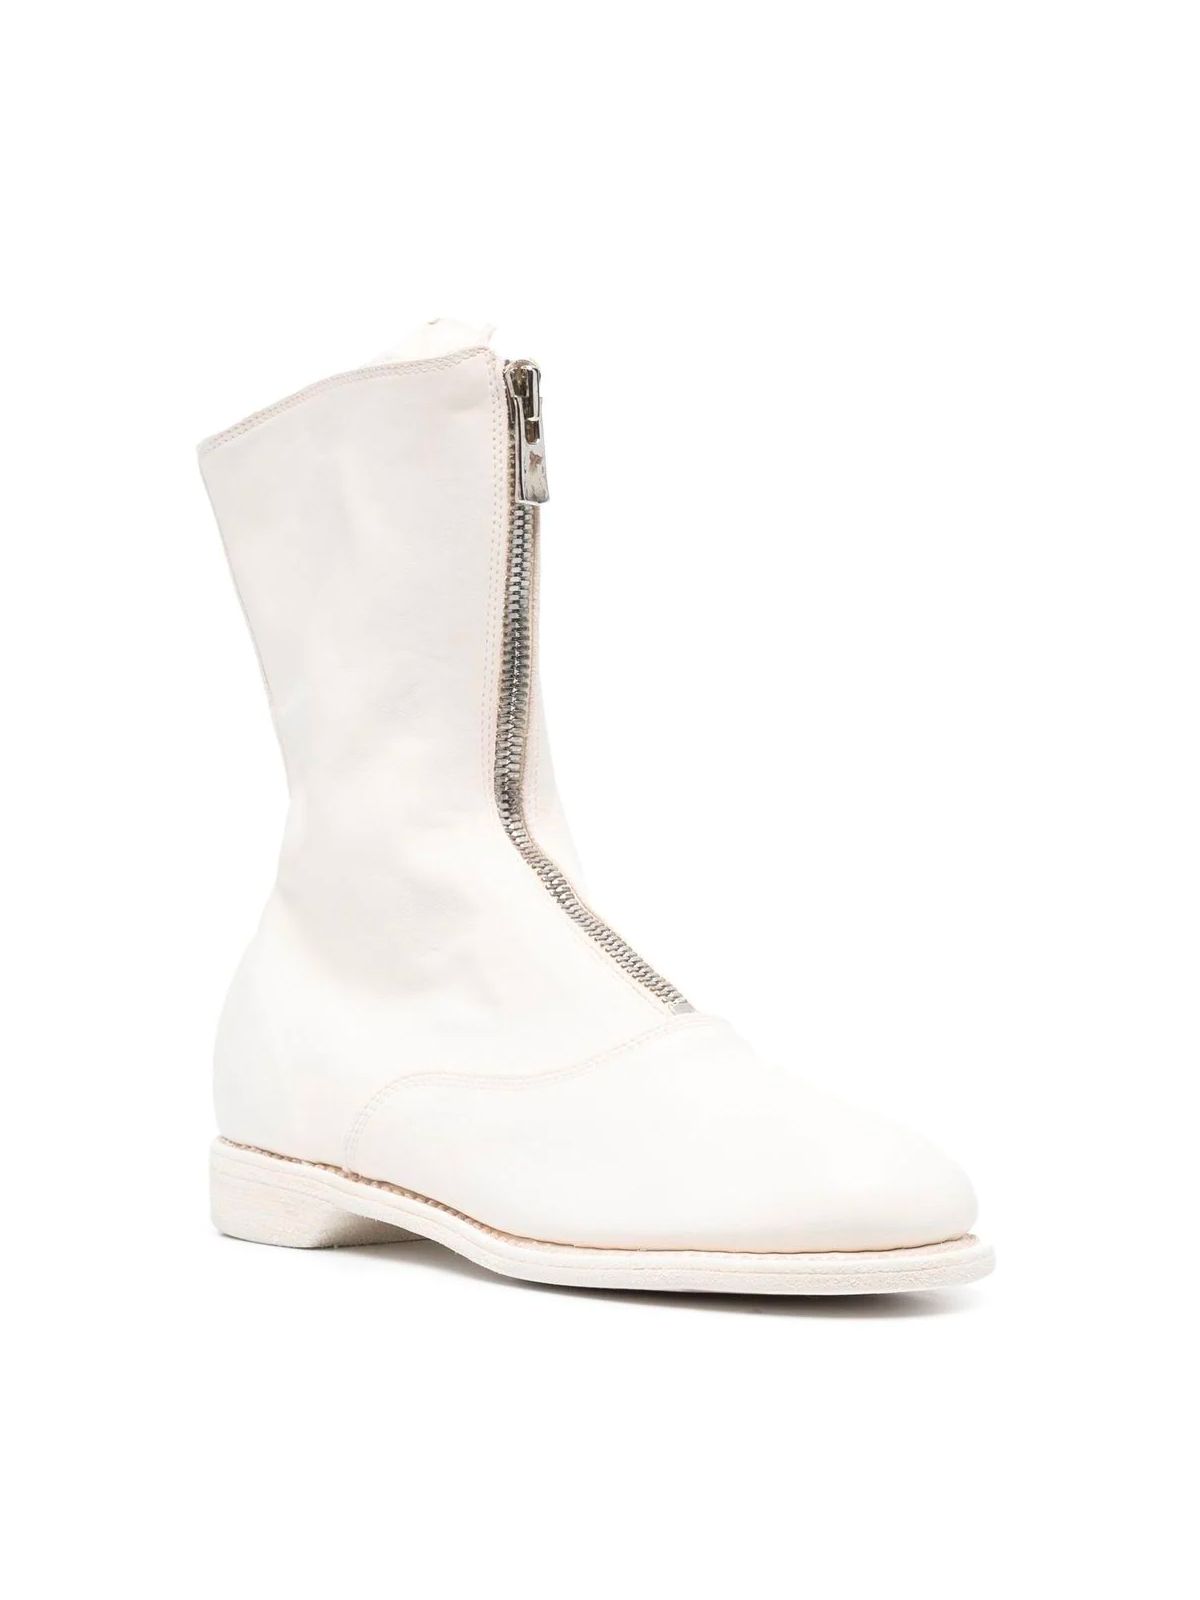 Shop Guidi Women's Leather Boots